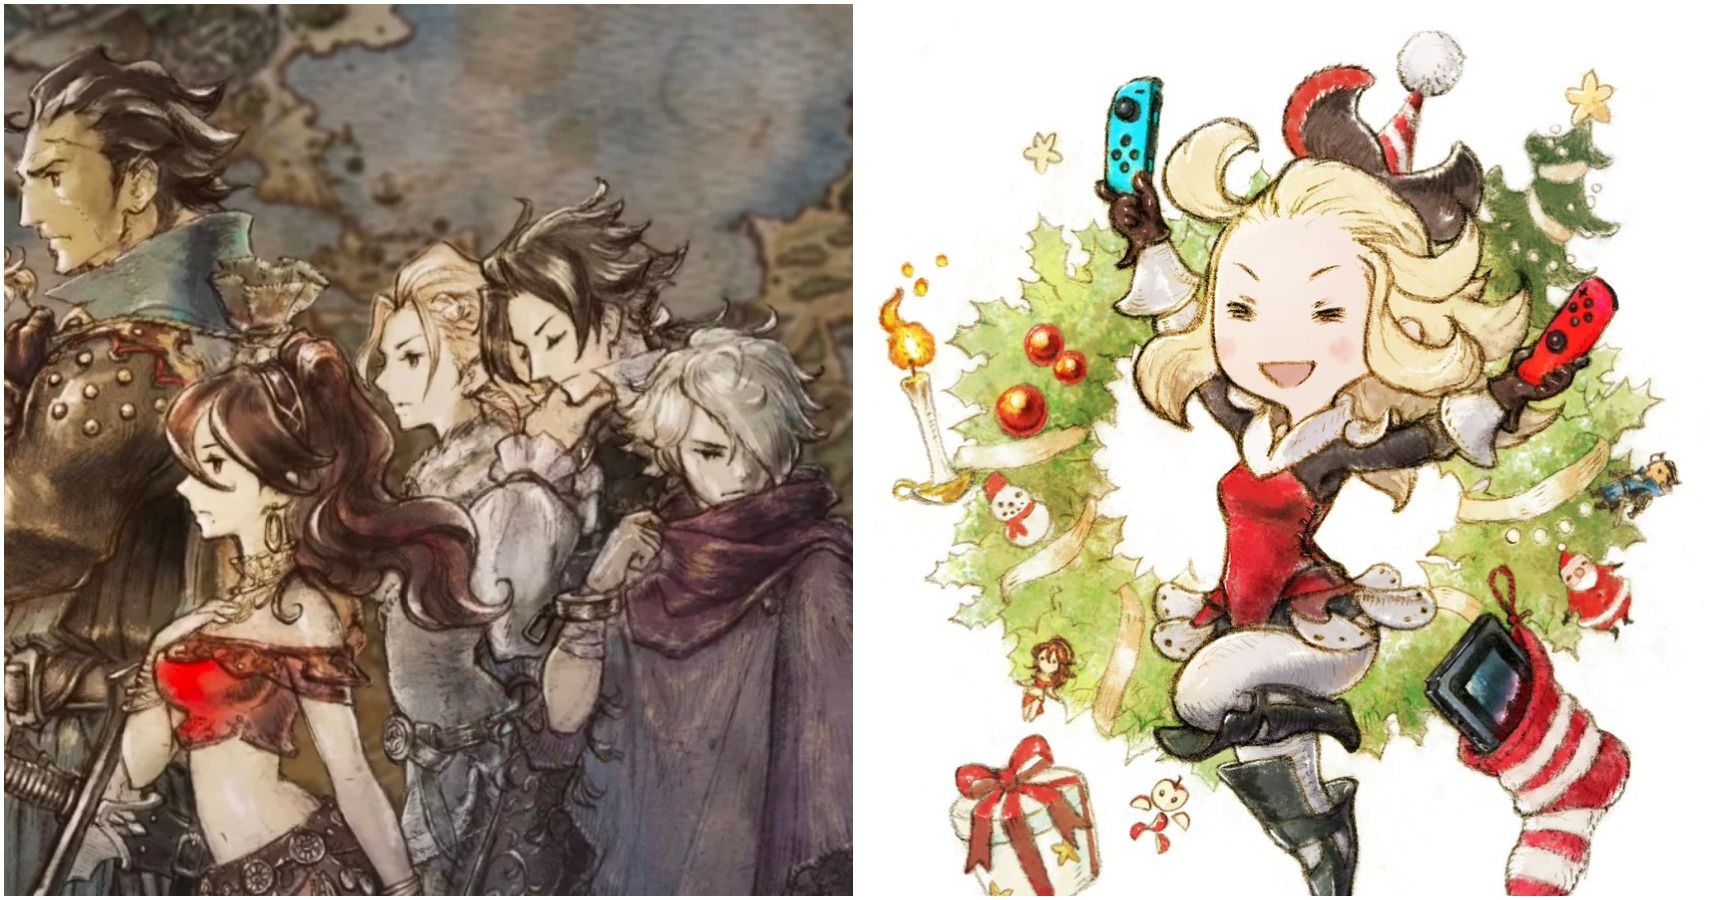 Did Square Enix Hide A Secret Message In Their Octopath Traveler Celebration Message